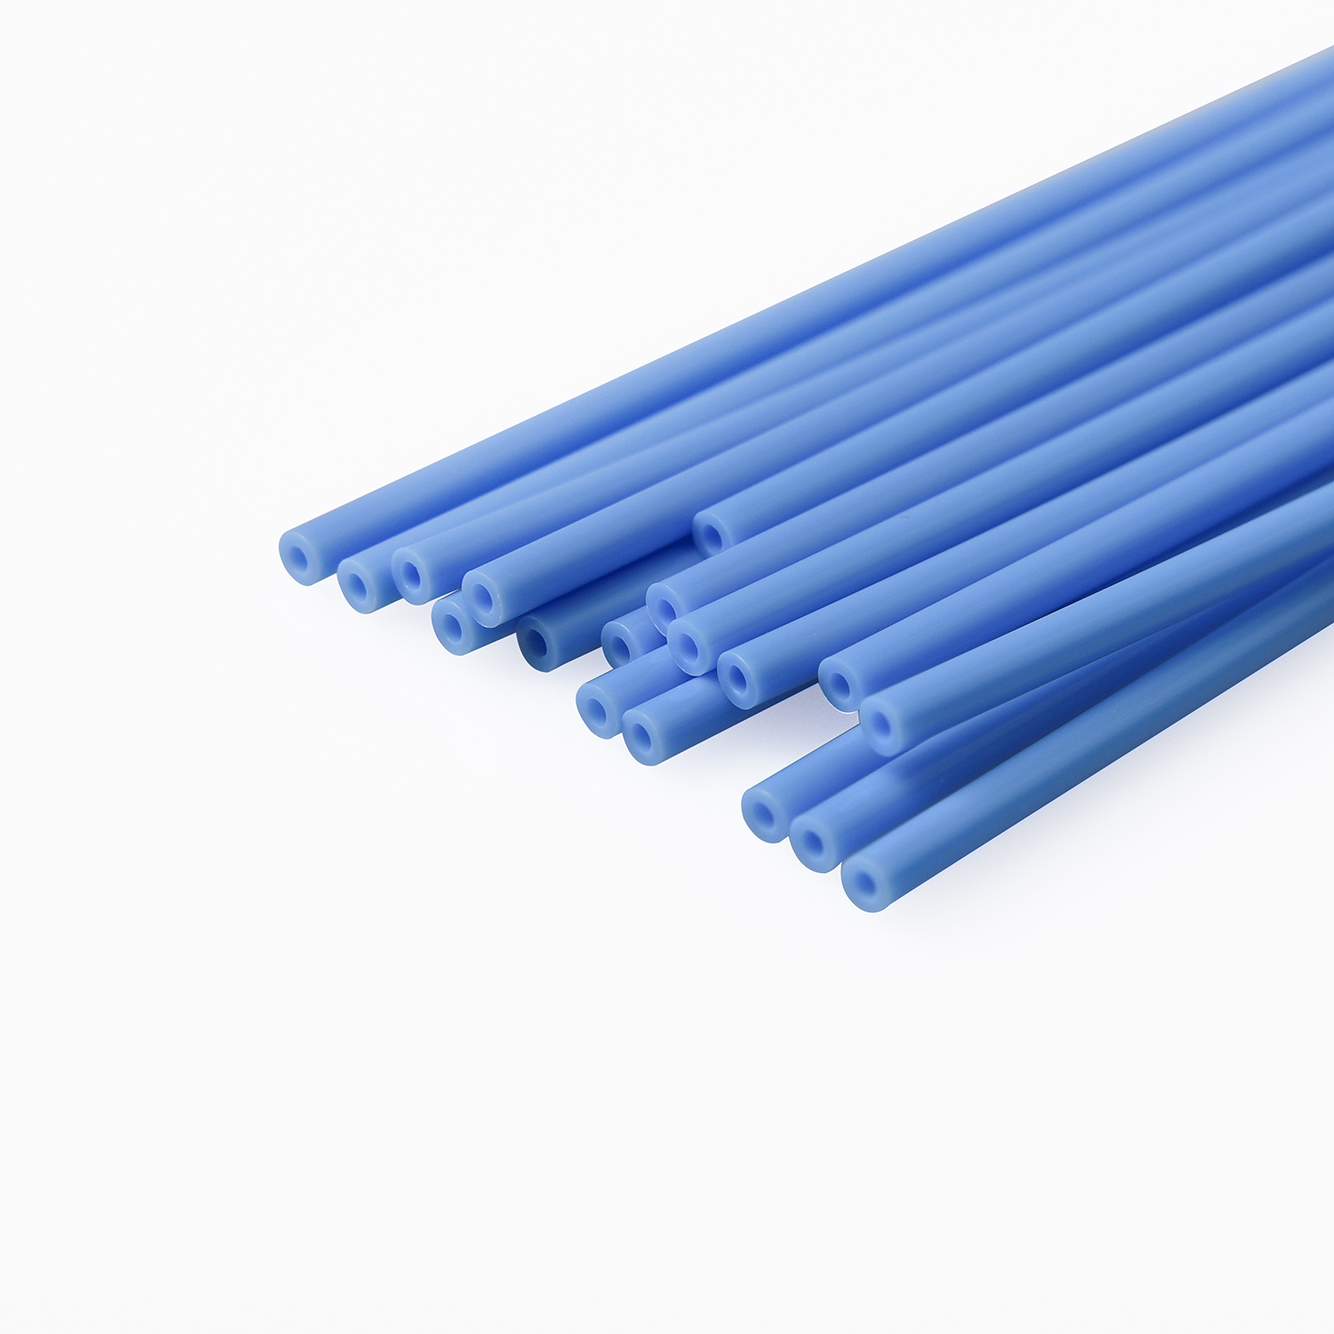 PP material catheter tubing extrusion